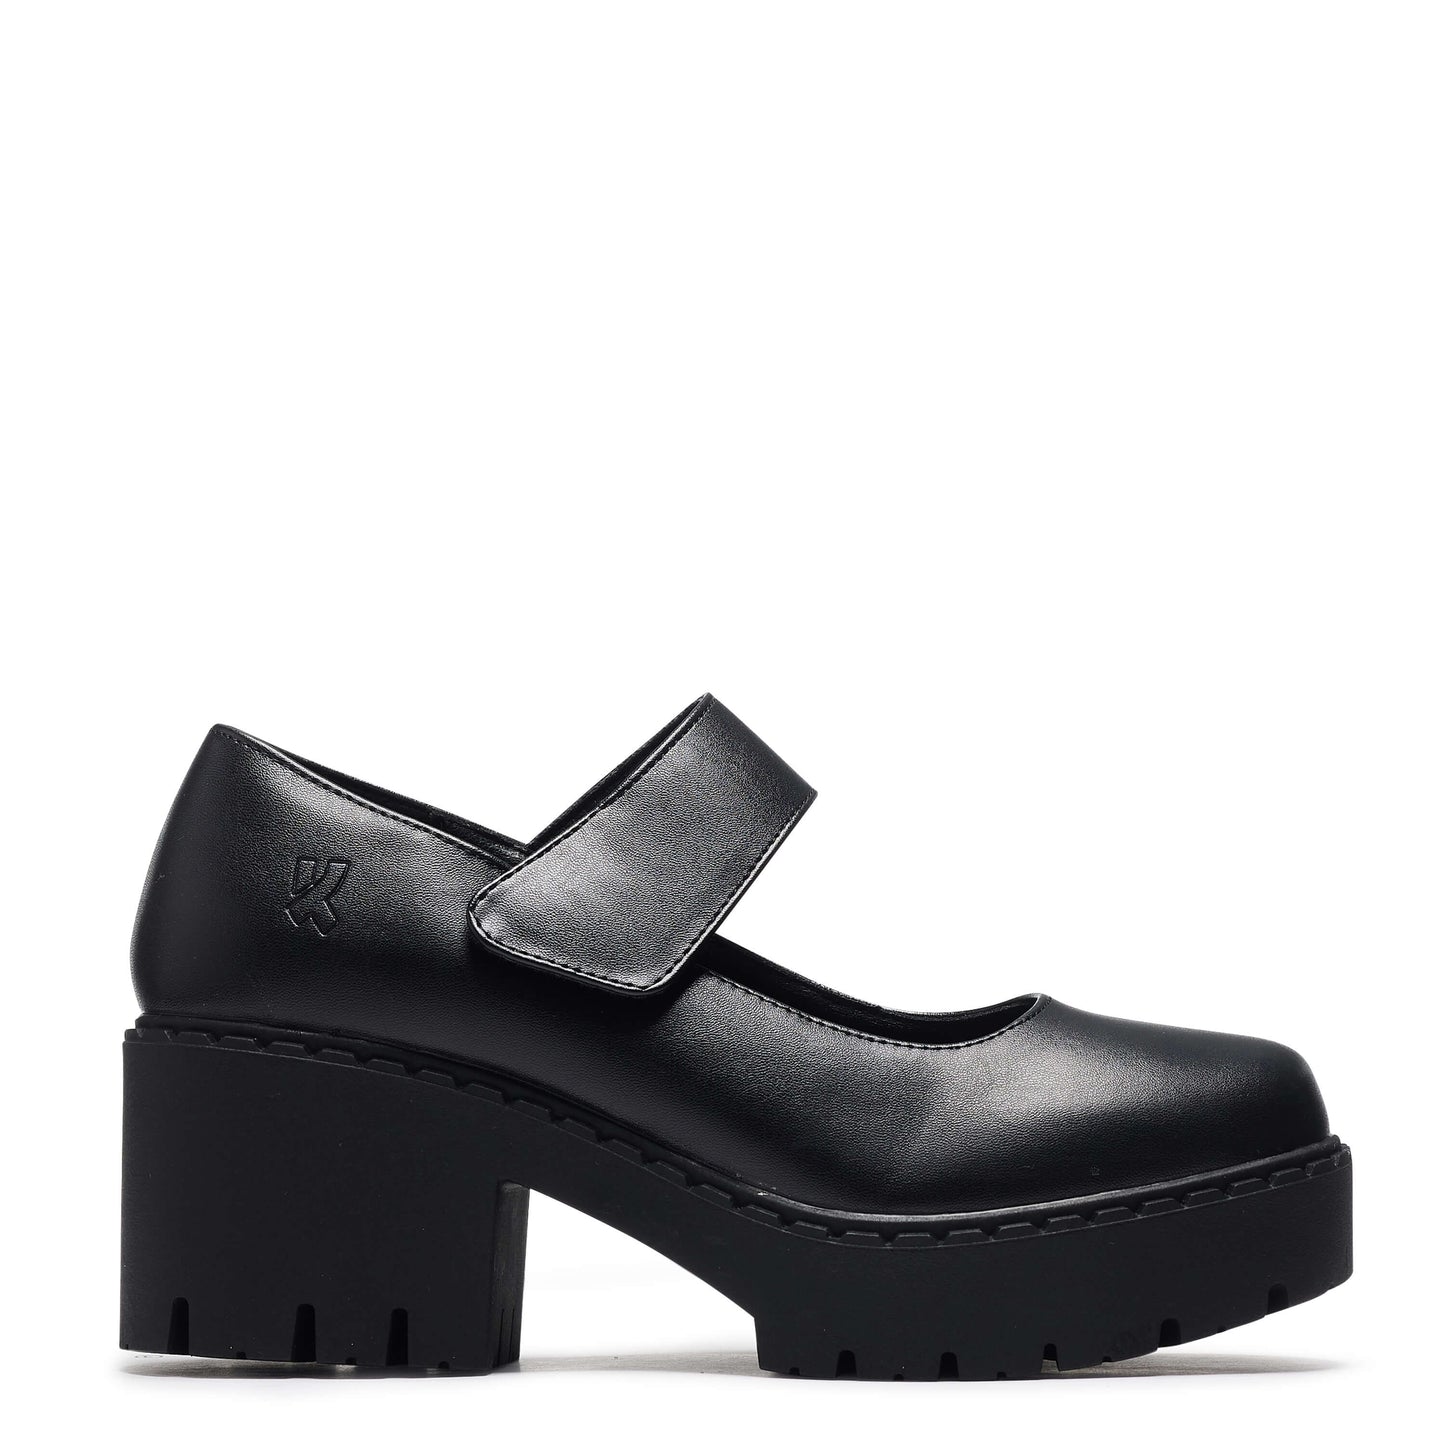 Beacons Switch Mary Jane Shoes - Mary Janes - KOI Footwear - Black - Main View